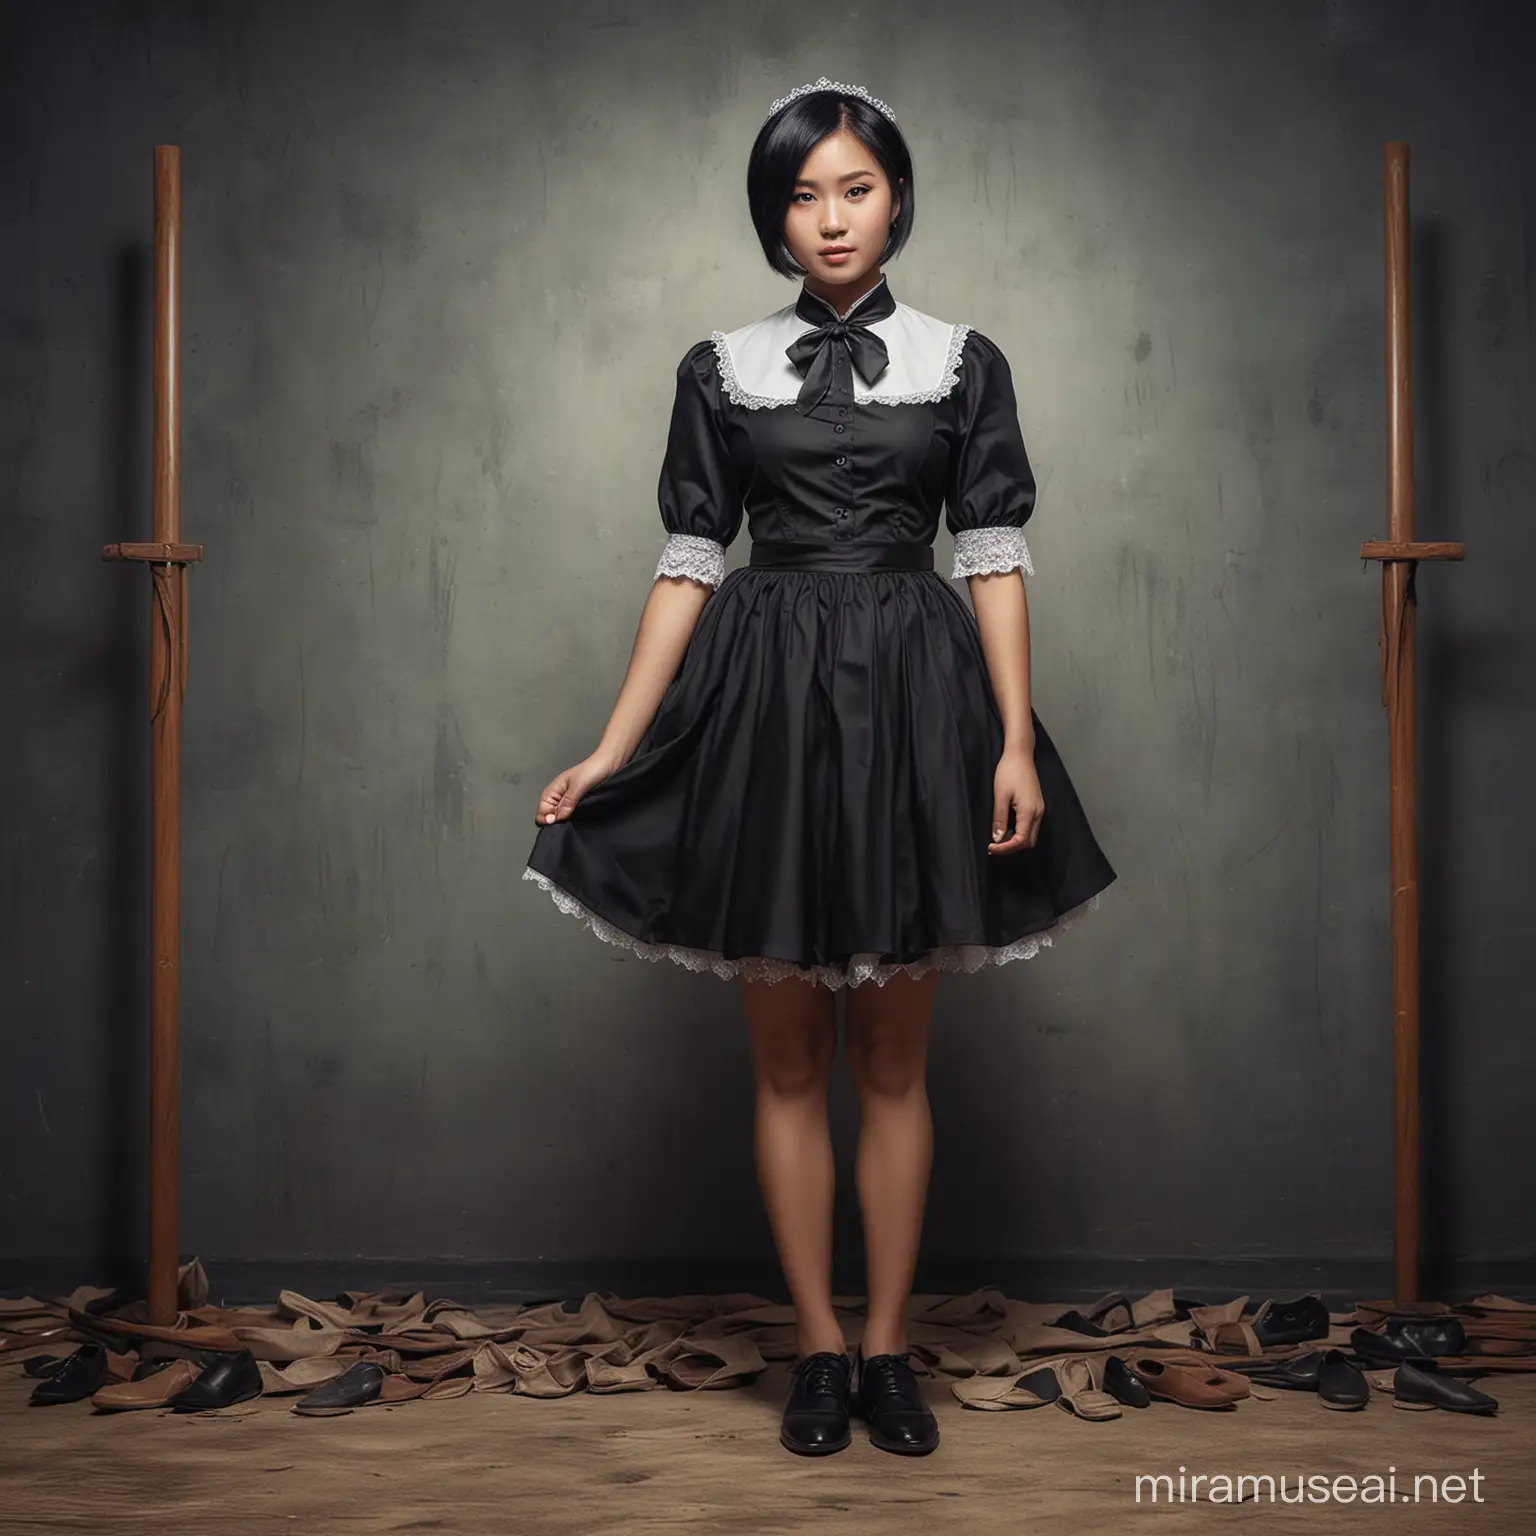 Indonesian Maid in Cinematic Fantasy Setting